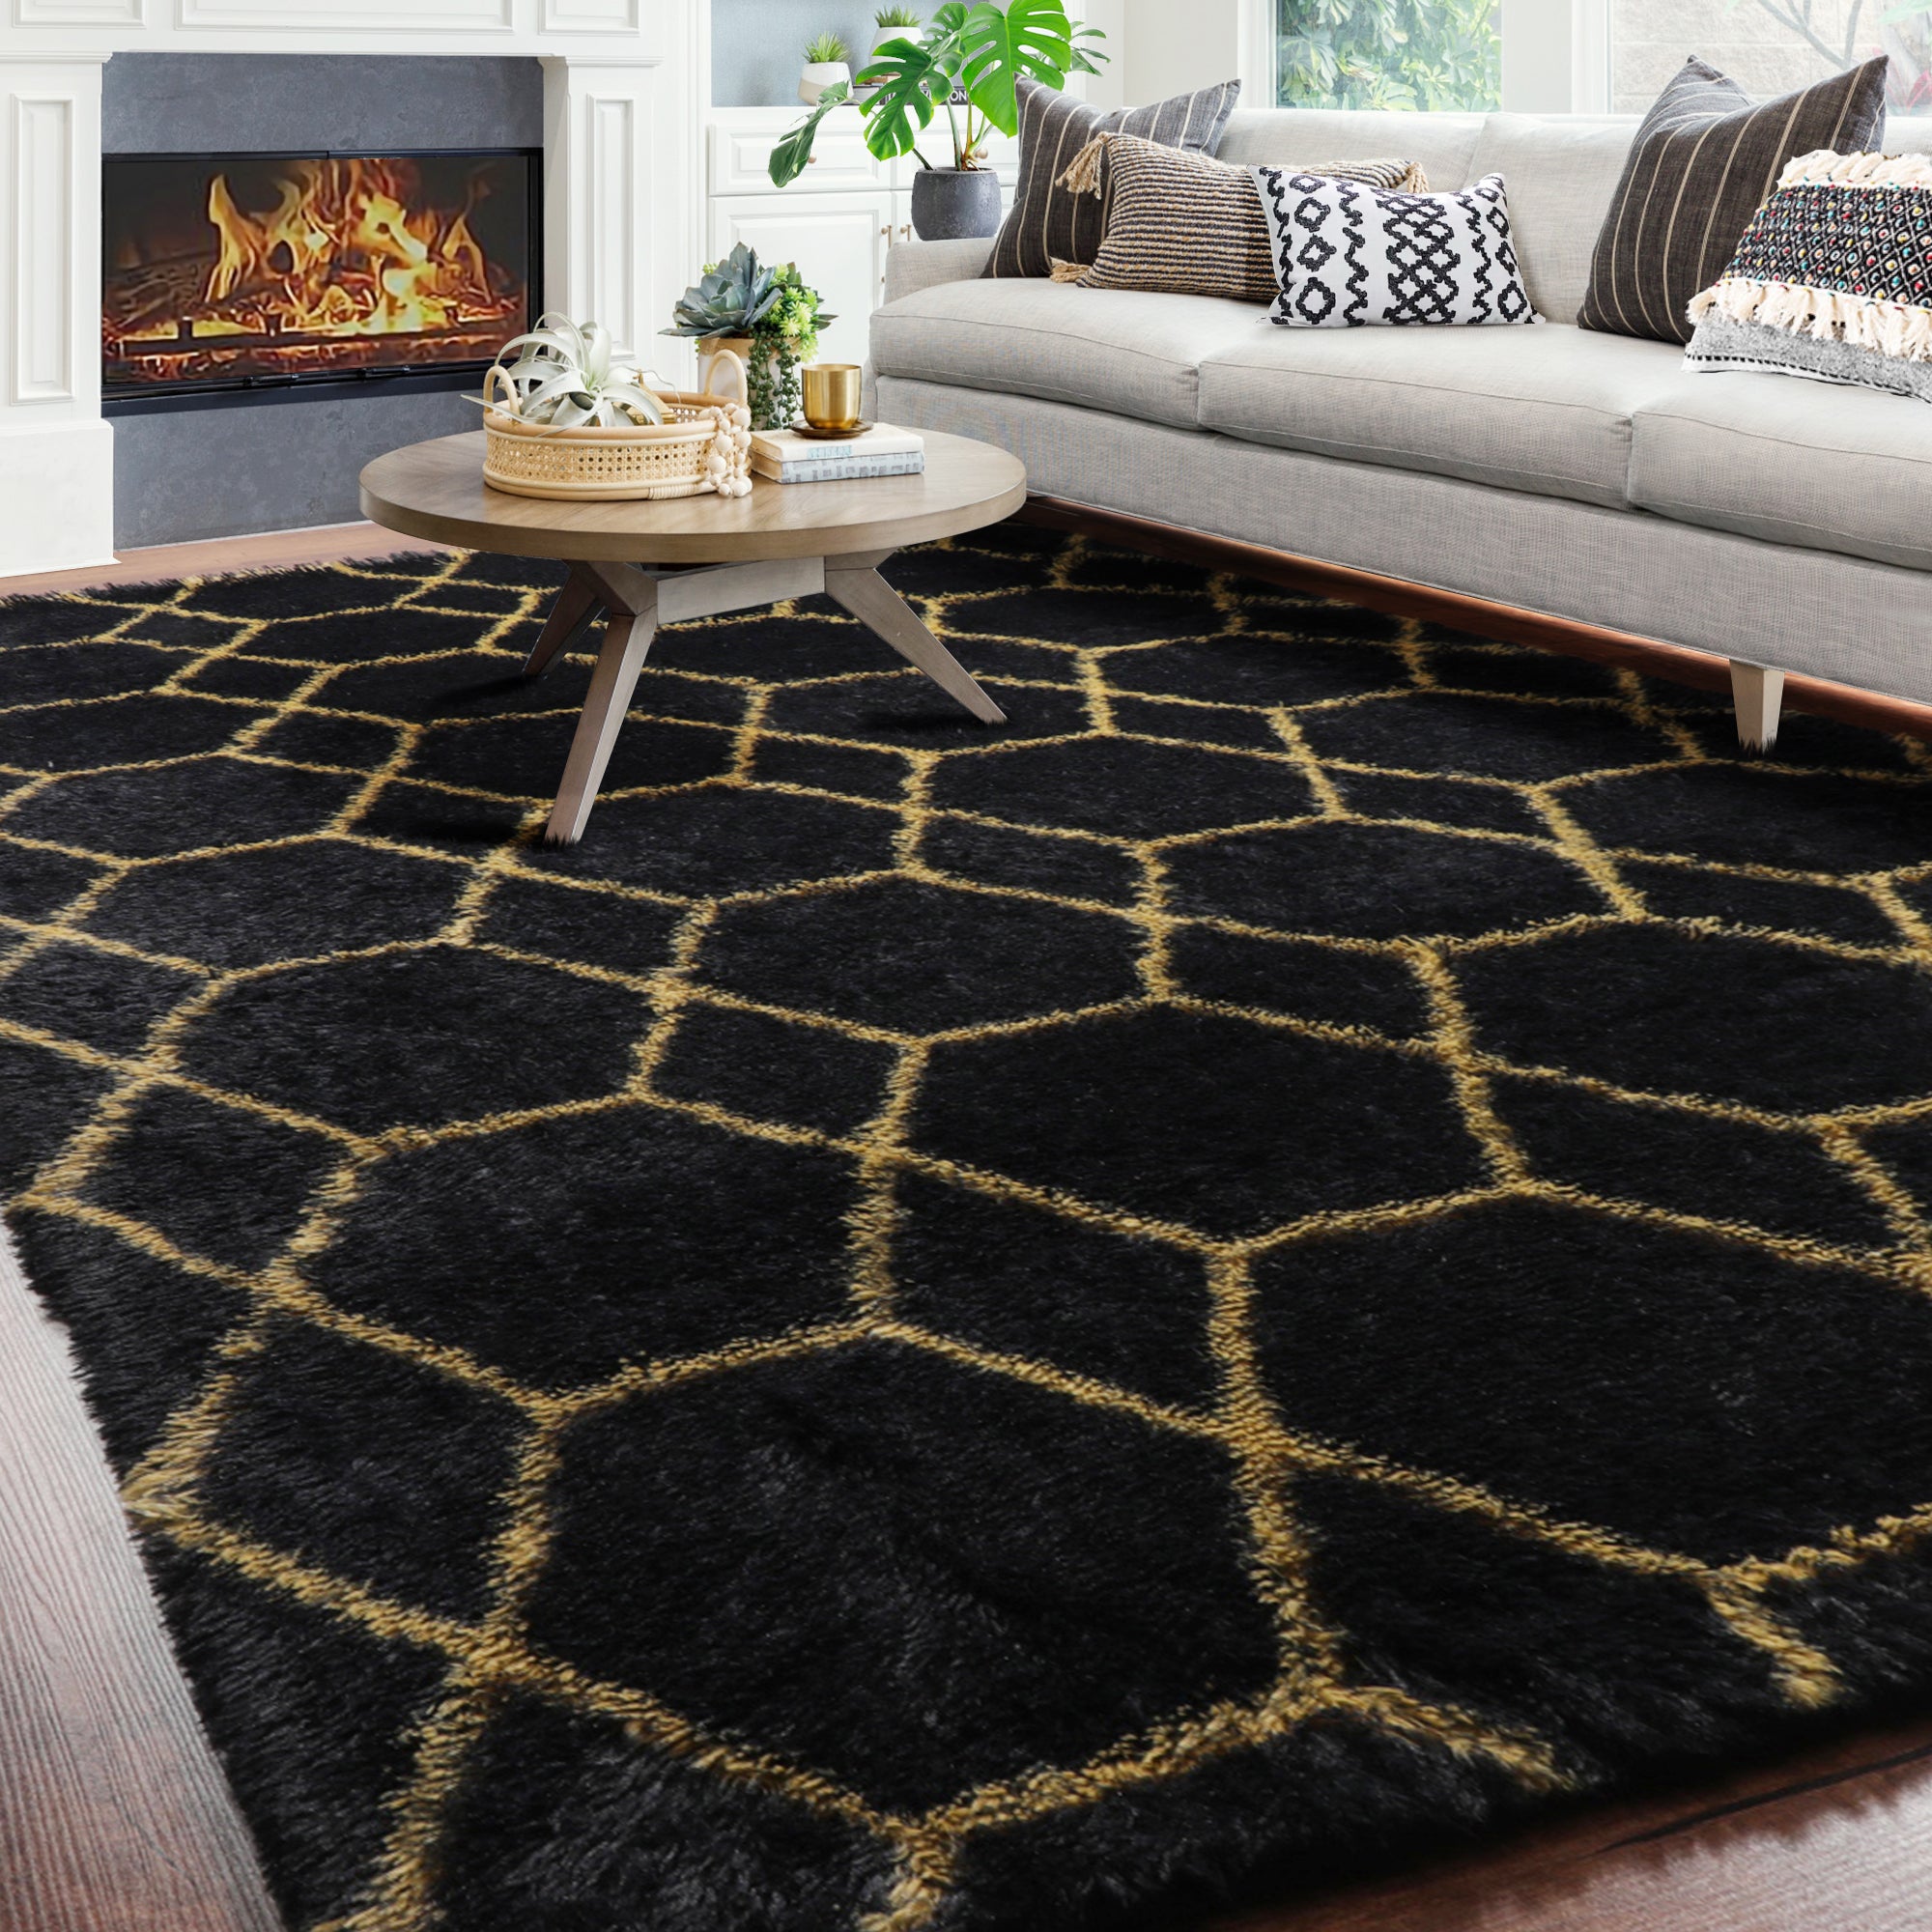 Geometric Fluffy Area Rug for Living Room Bedroom, Black and Gold Rug